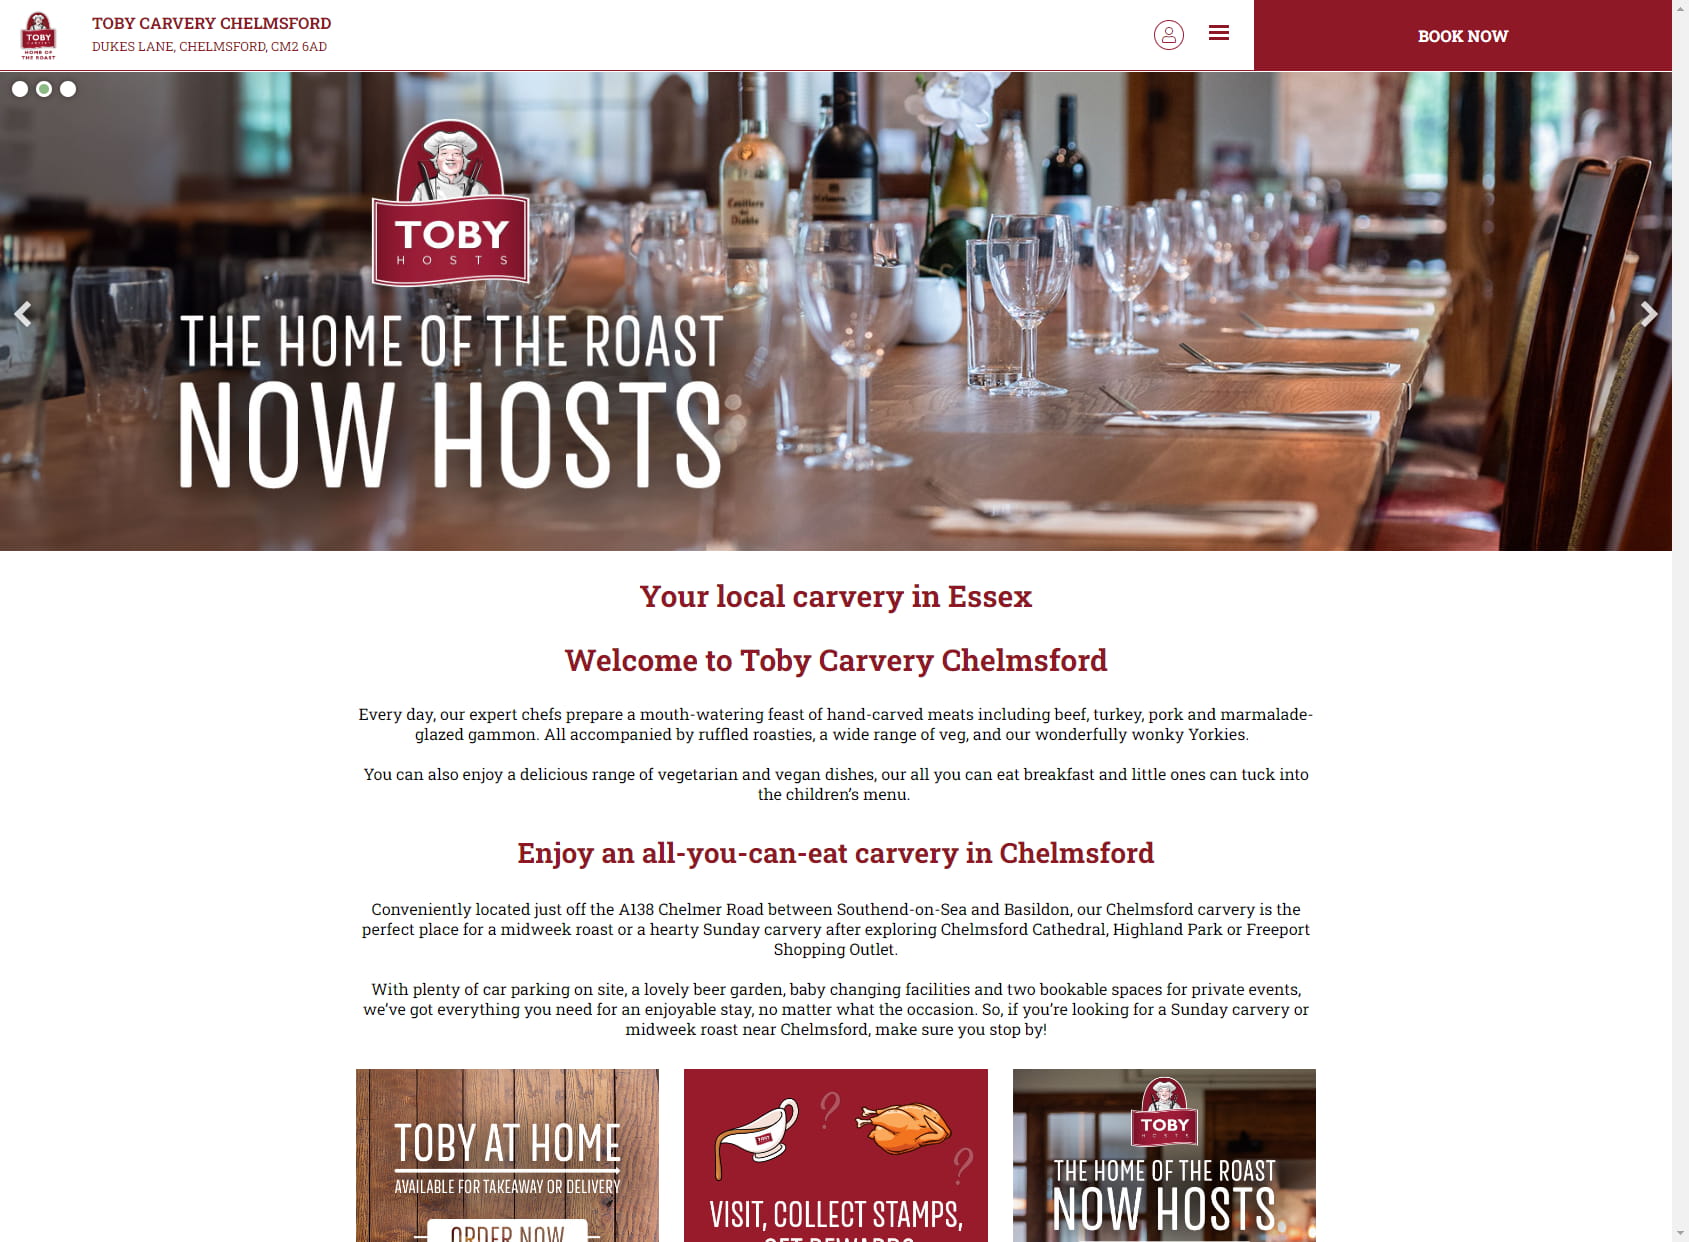 Toby Carvery Chelmsford